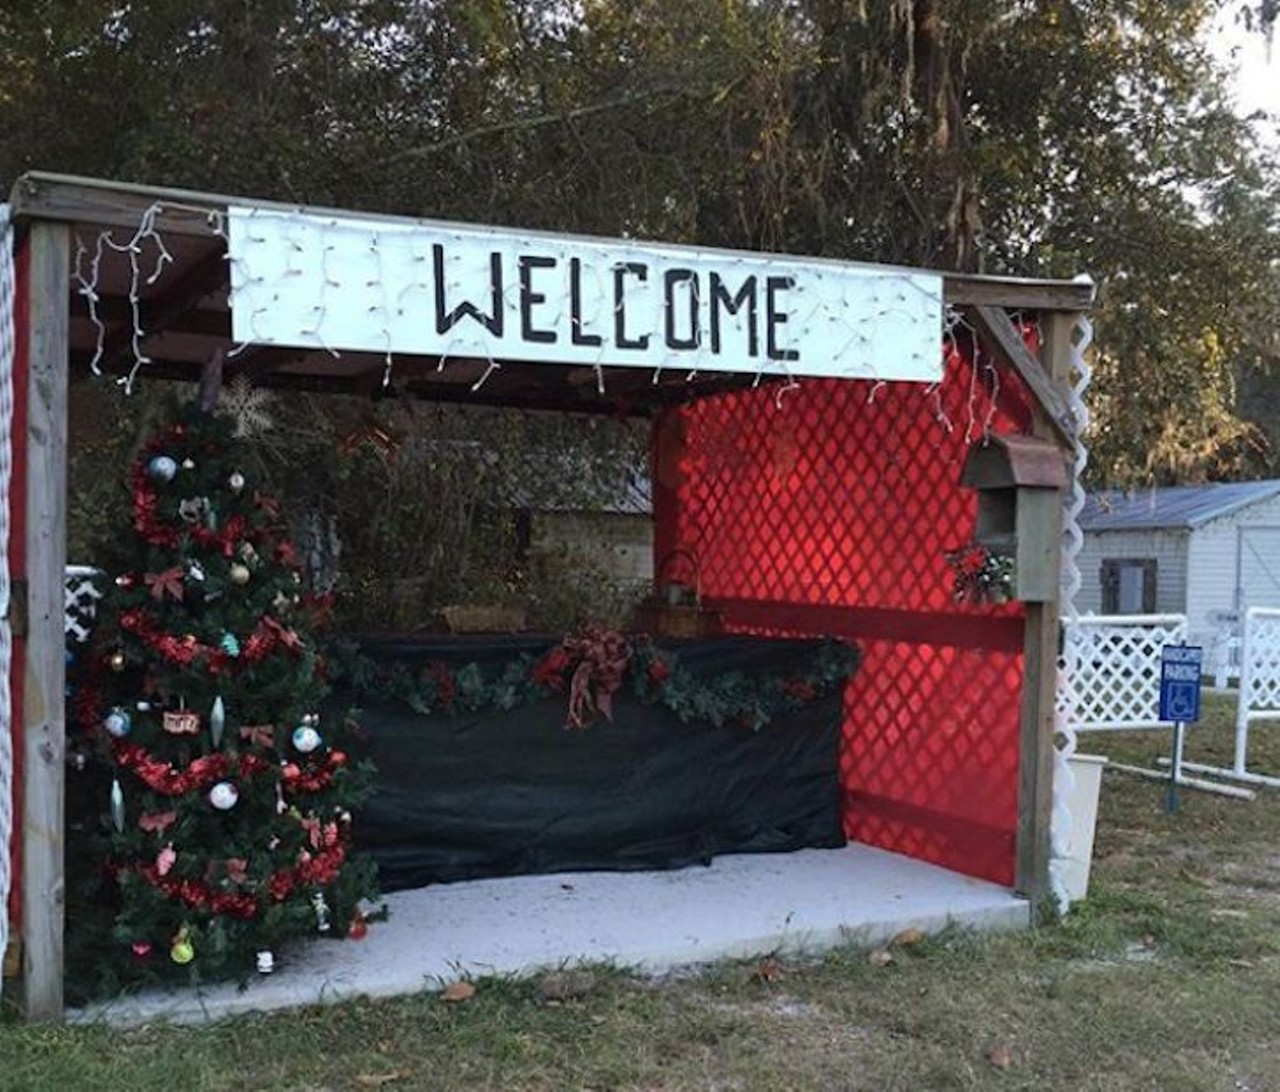 Christmas in the Country  
130 Garfield Road, Deltona
Nov. 23-Dec. 22
See thousands of lights and decorations while on a hayride. Activities for all ages.
Photo via River of Life Church/Instagram